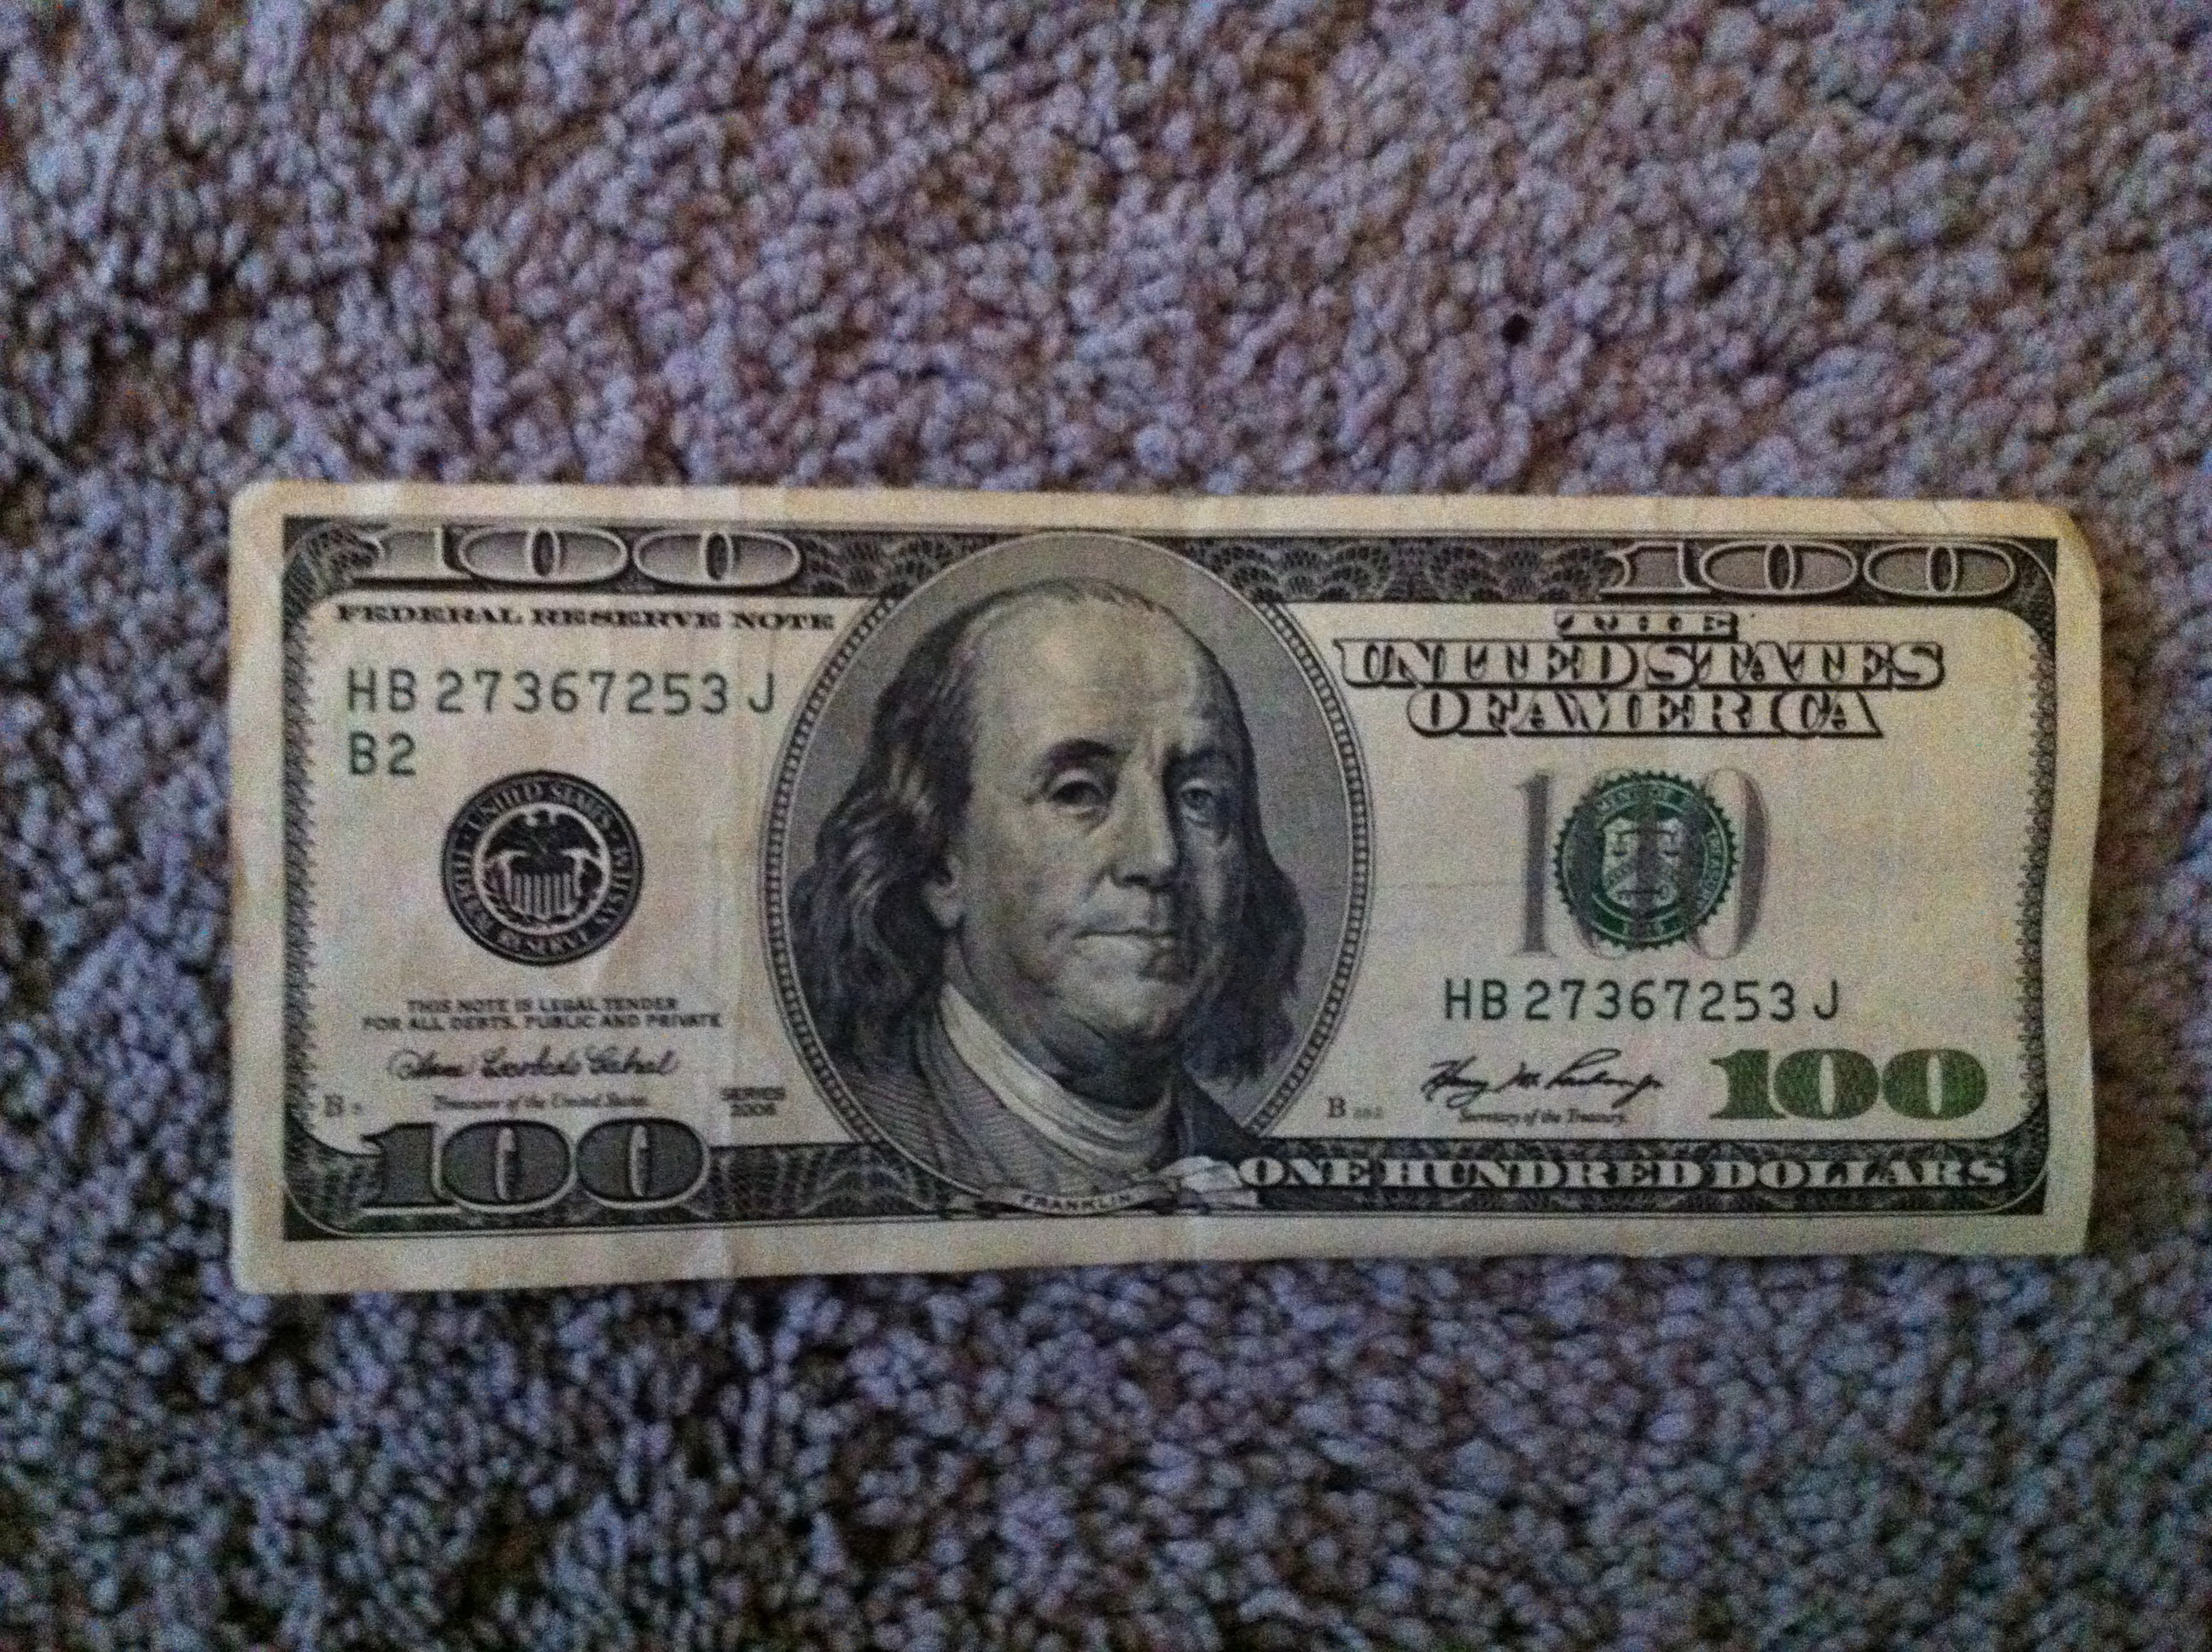 This is a pic of the $100 bill I found. It didn't occur to me at the time to take a picture of it with ME IN IT, so you're just going to take my word for it when I tell you that that's my grey carpet, OK?